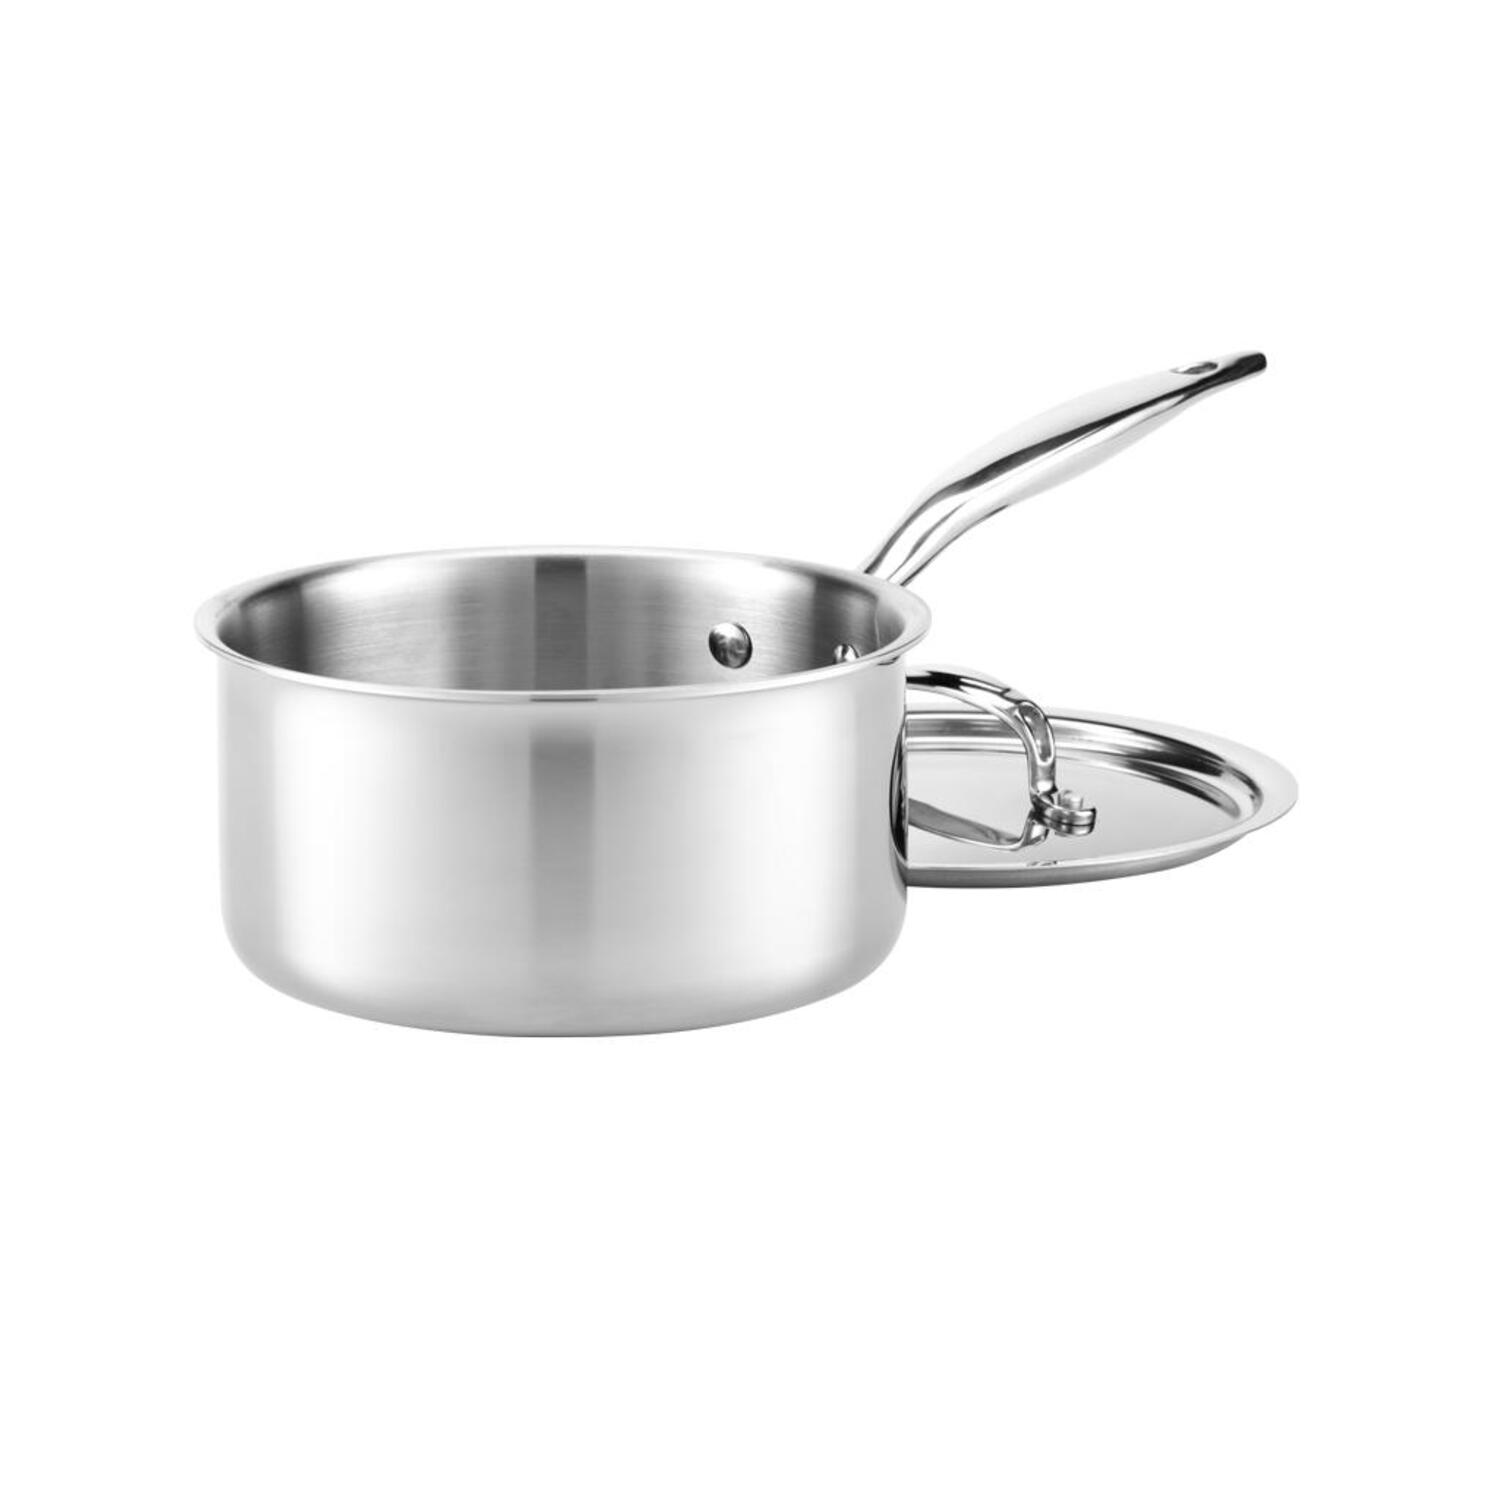 ROYDX Stainless Steel Sauce Pan w/ Lid, 3QT Saucepan with Steamer